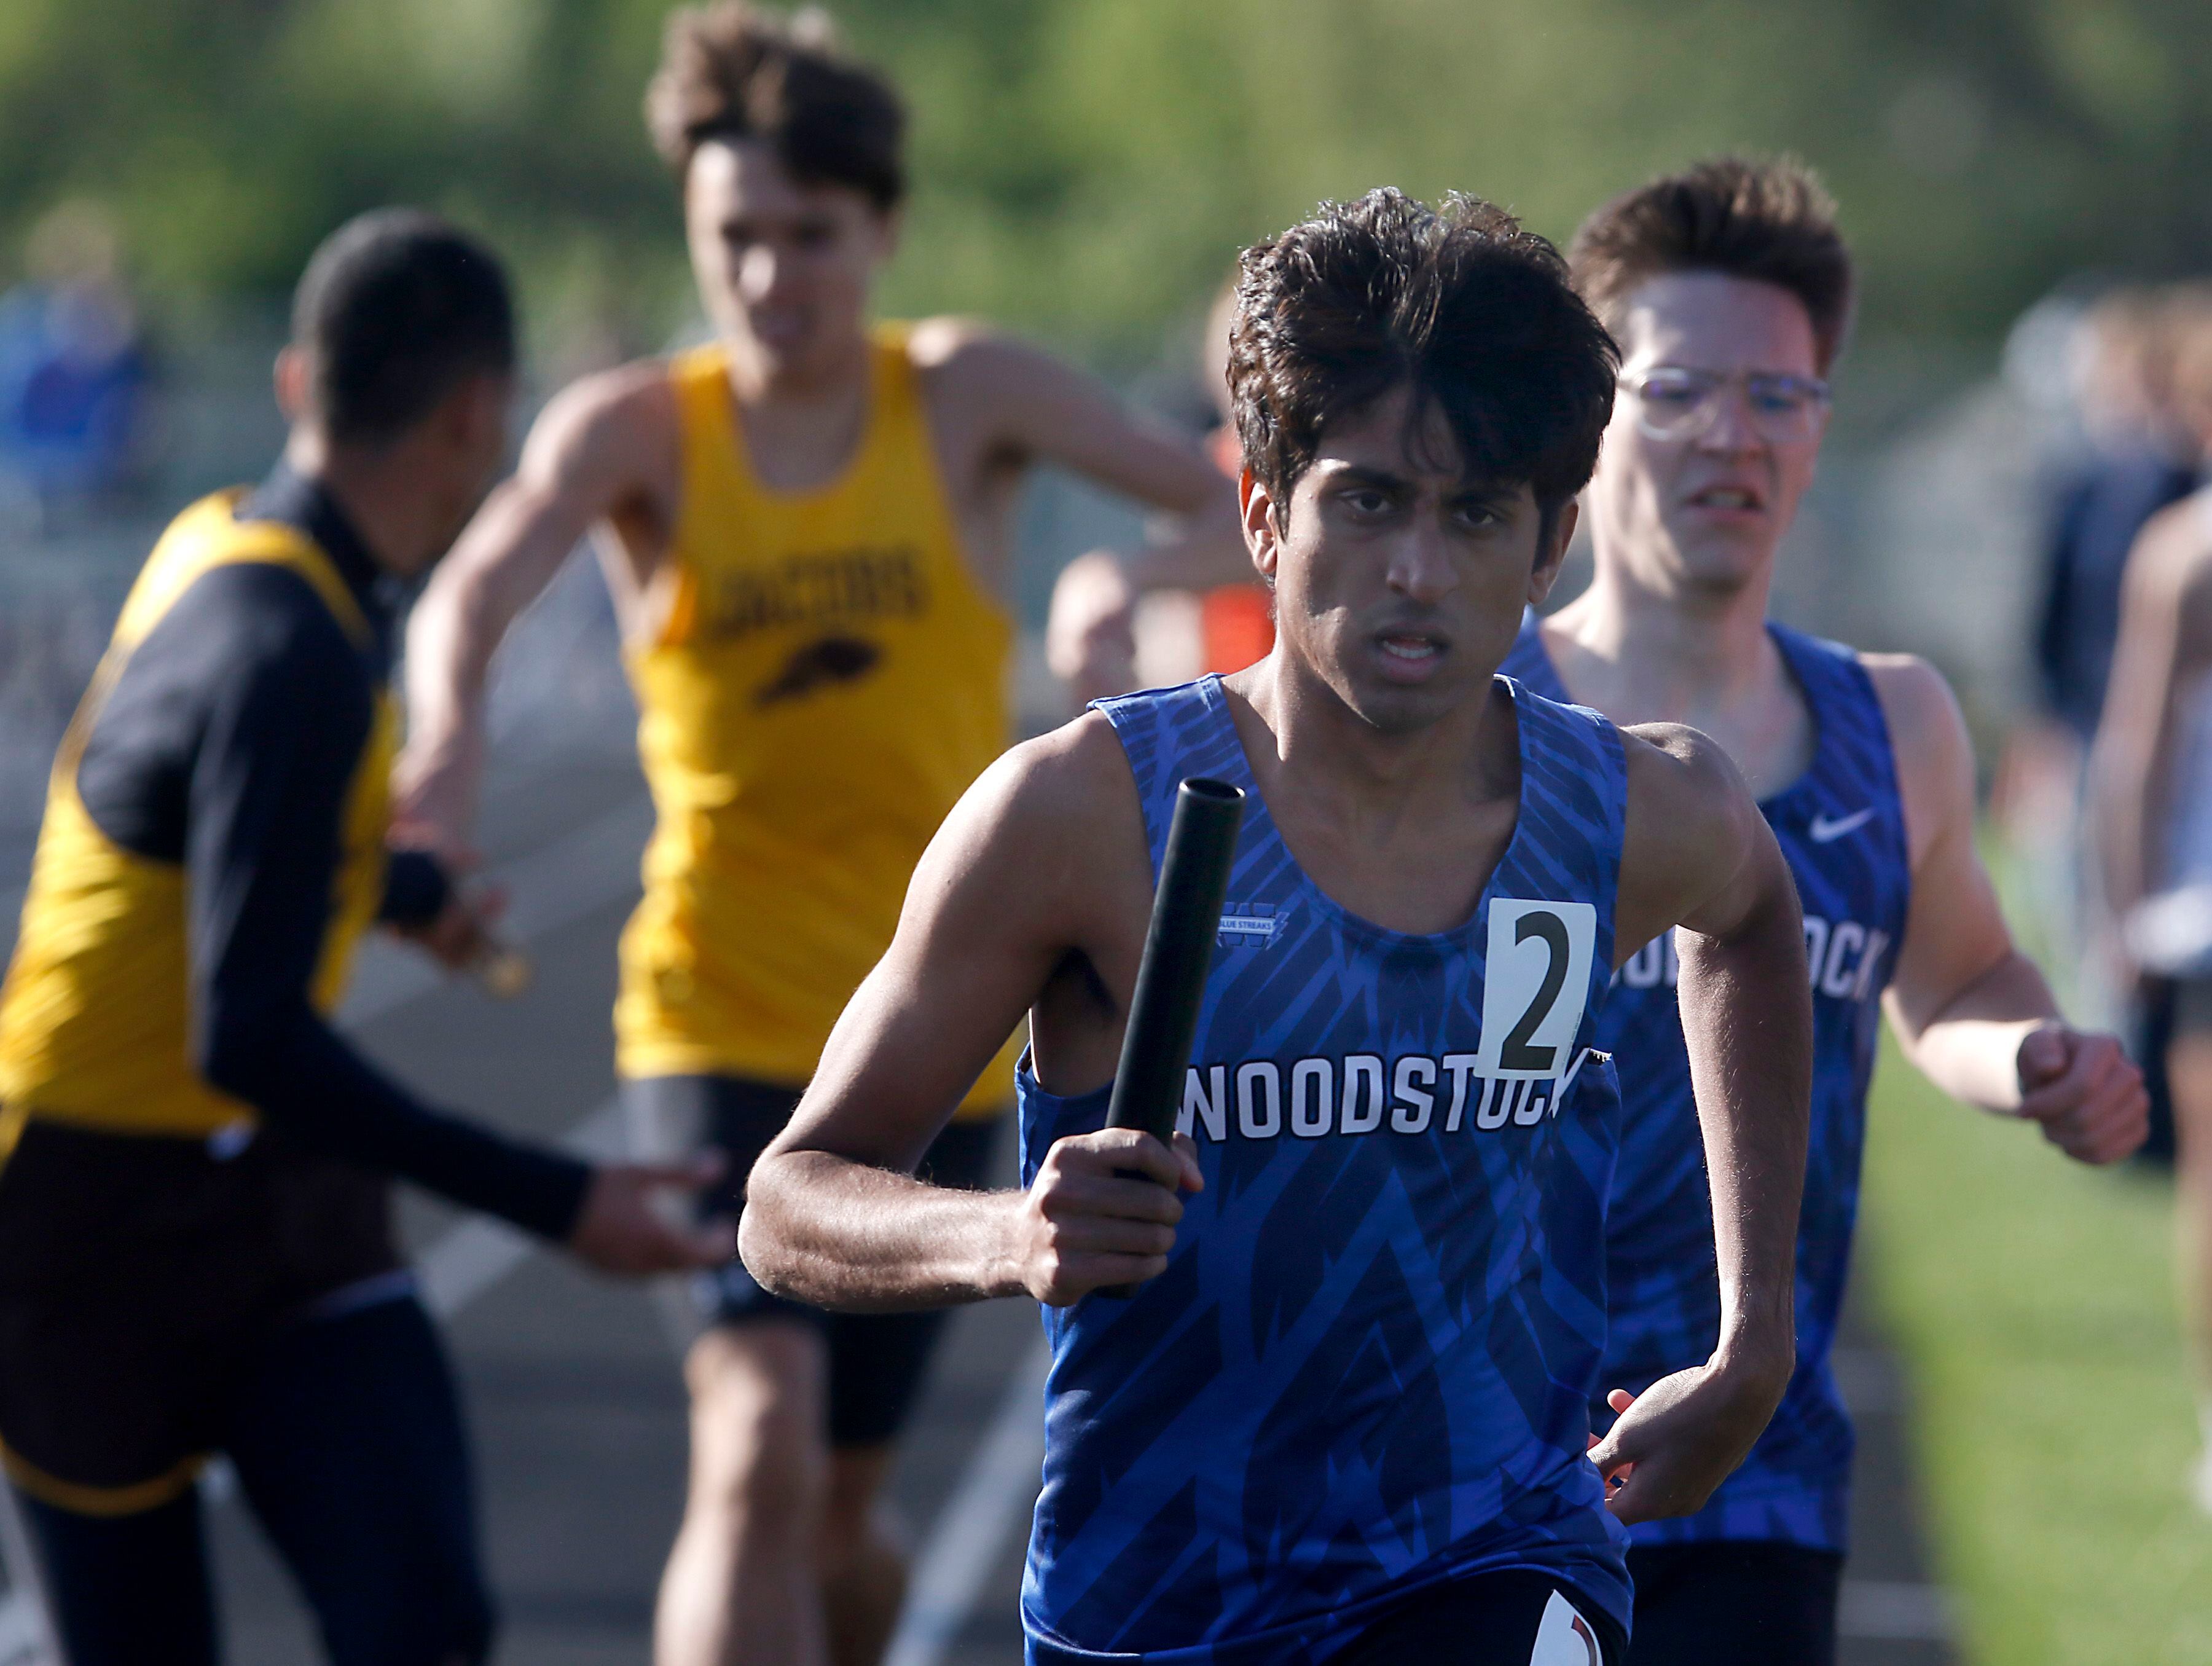 Woodstock’s Ishan Patelon takes off after getting the baton for the last leg of the 4 x 800m meter relay on Friday, April 19, 2024, during the McHenry County Track and Field Meet at Cary-Grove High School.